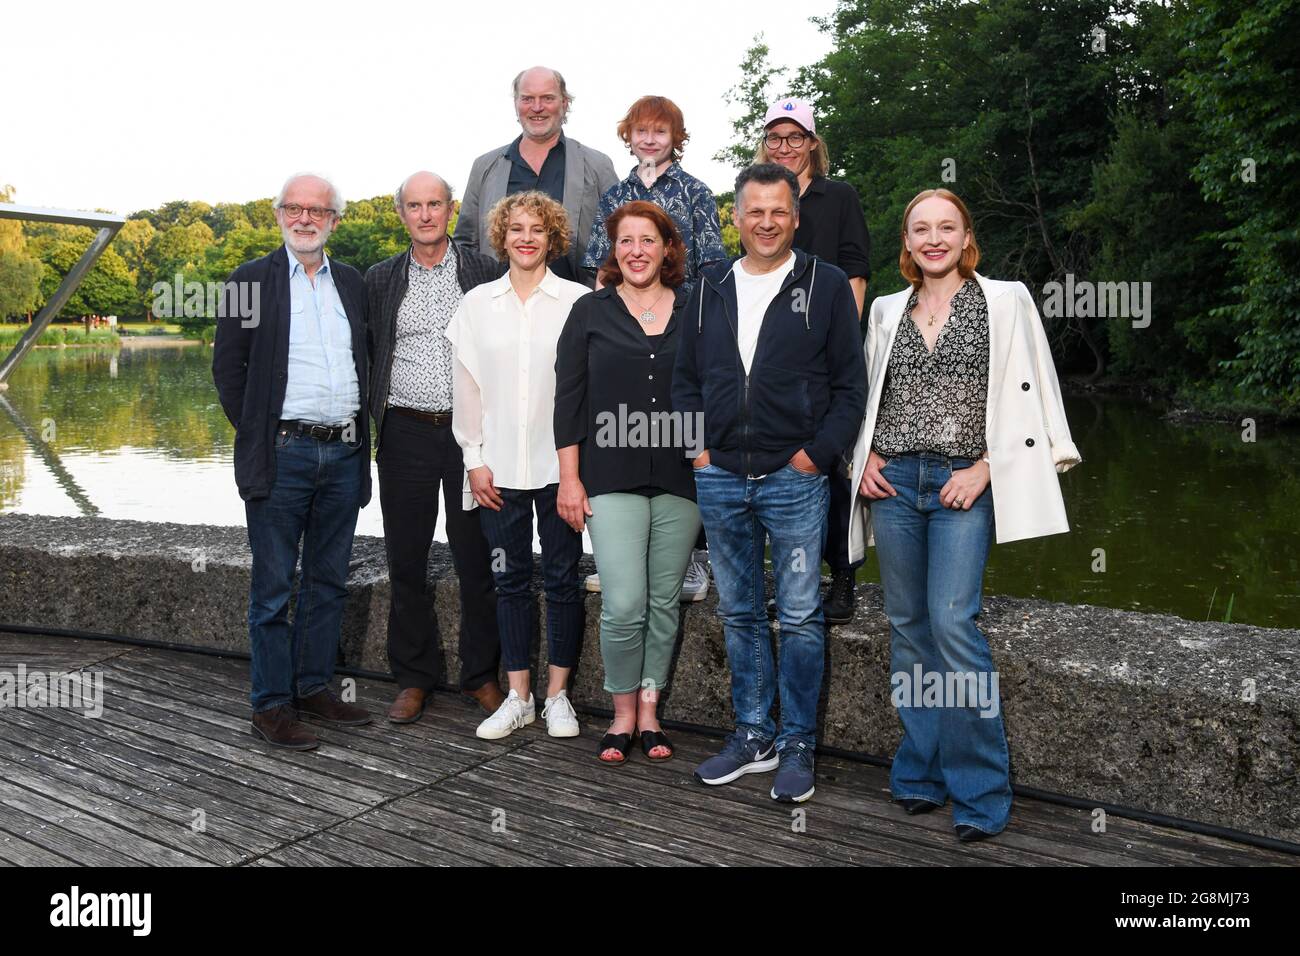 Munich, Germany. 21st July, 2021. The actors Ferdinand Dörfler (back, l-r), Xari Wimbauer, Katja Bürkle, as well as Ulrich Limmer (front, l-r), producer, and the actors Johannes Herrschmann, Silja Bächli, Luise Kinseher, Gerhard Wittmann and Brigitte Hobmeier, taken at a photo session before the screening of the film "Weißbier im Blut" at the open-air cinema "Kino Mond & Sterne" in the Westpark. Credit: Tobias Hase/dpa/Alamy Live News Stock Photo